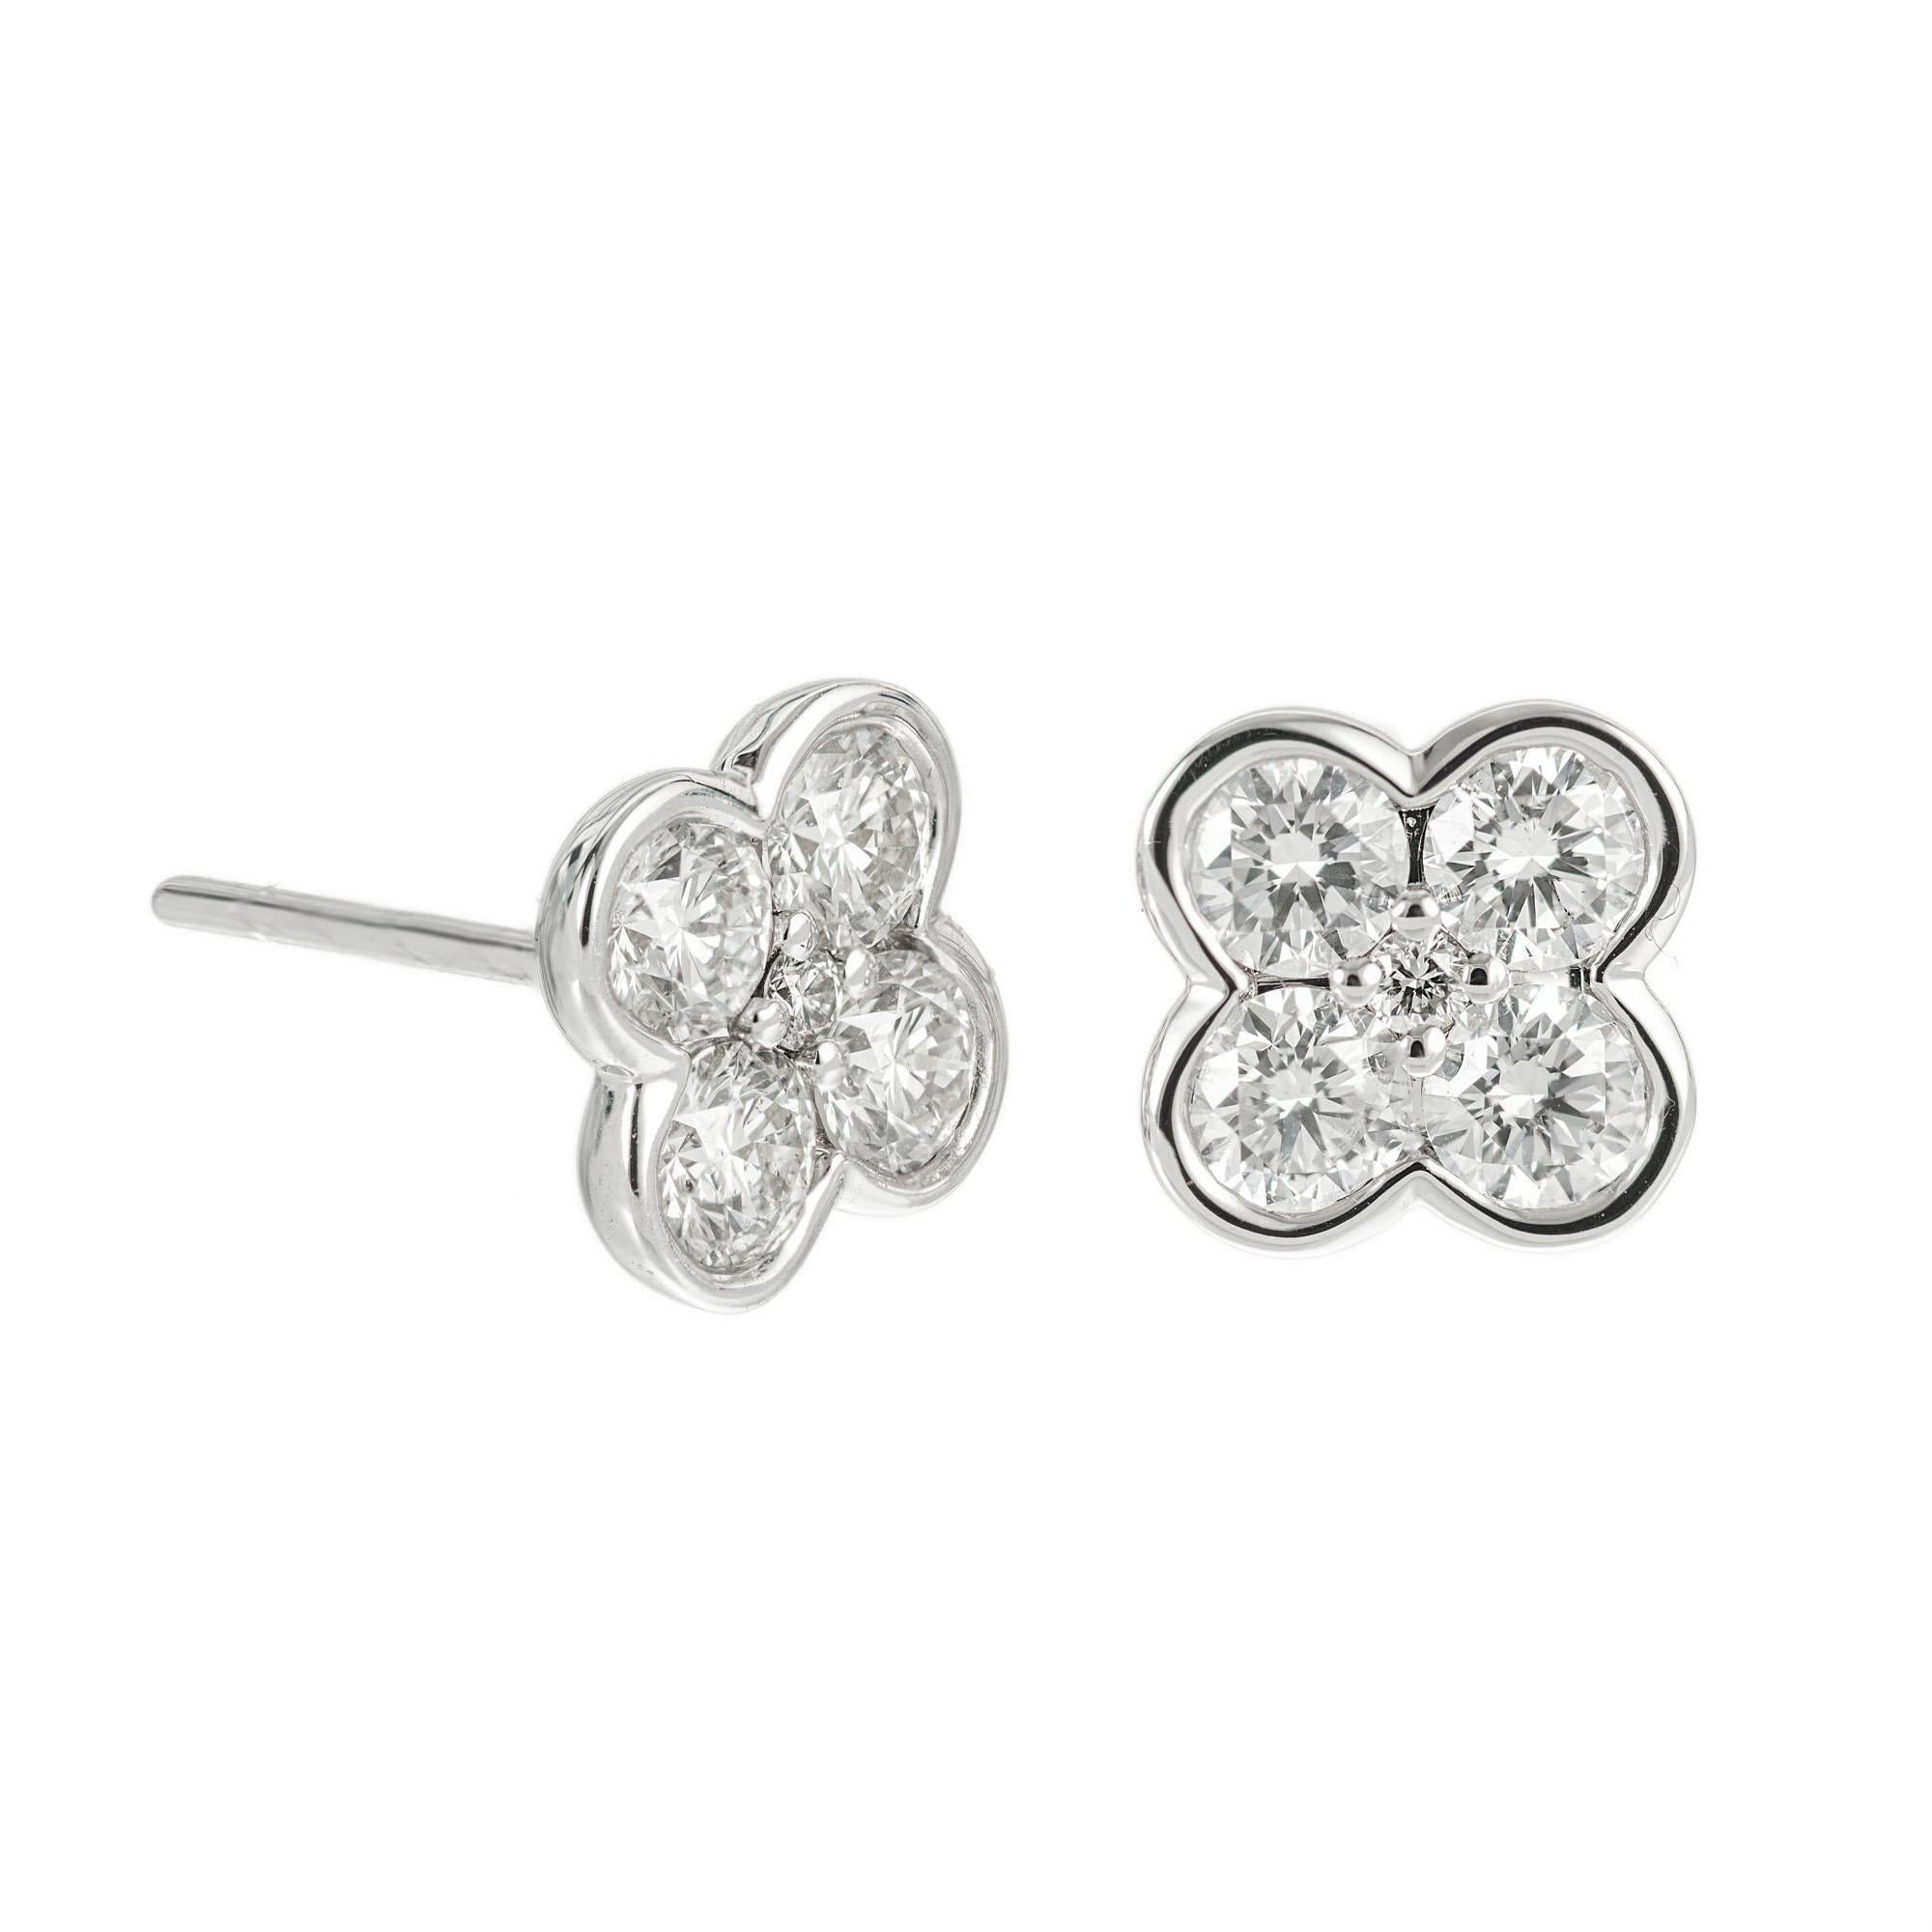 Diamond flower petal earrings in white gold. 10 round brilliant cut diamonds approx. 1.10 ts. Designed and crafted in the Peter Suchy workshop.

10 round brilliant cut diamonds, F-G SI approx. 1.10cts 
14k white gold 
Stamped: 585
2.2 grams
Top to